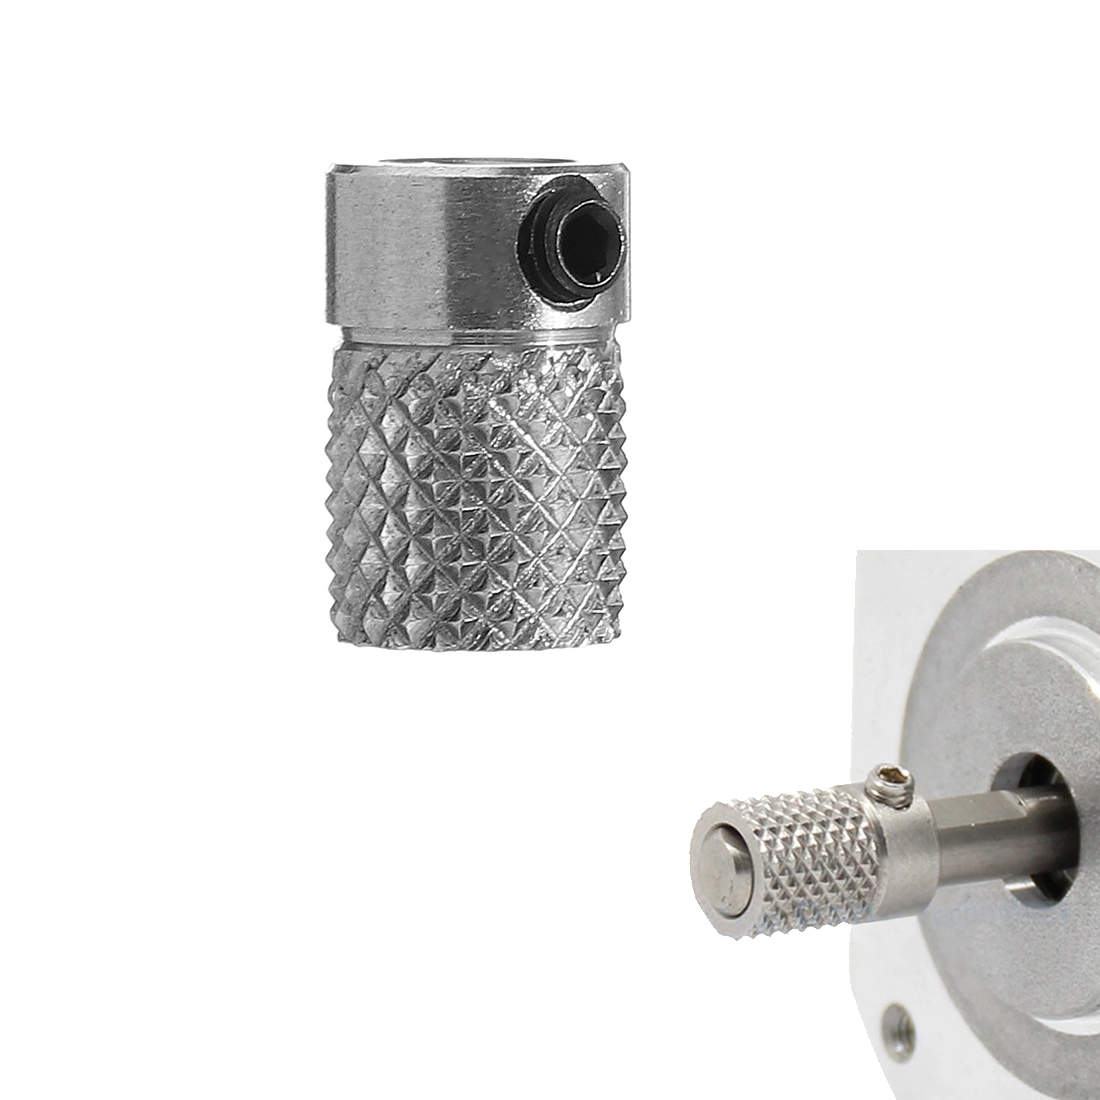 

3Pcs 12*8mm Ultimaker2 Stainless Steel Original Extrusion Wheel Knurled Wheel for 3D Printer